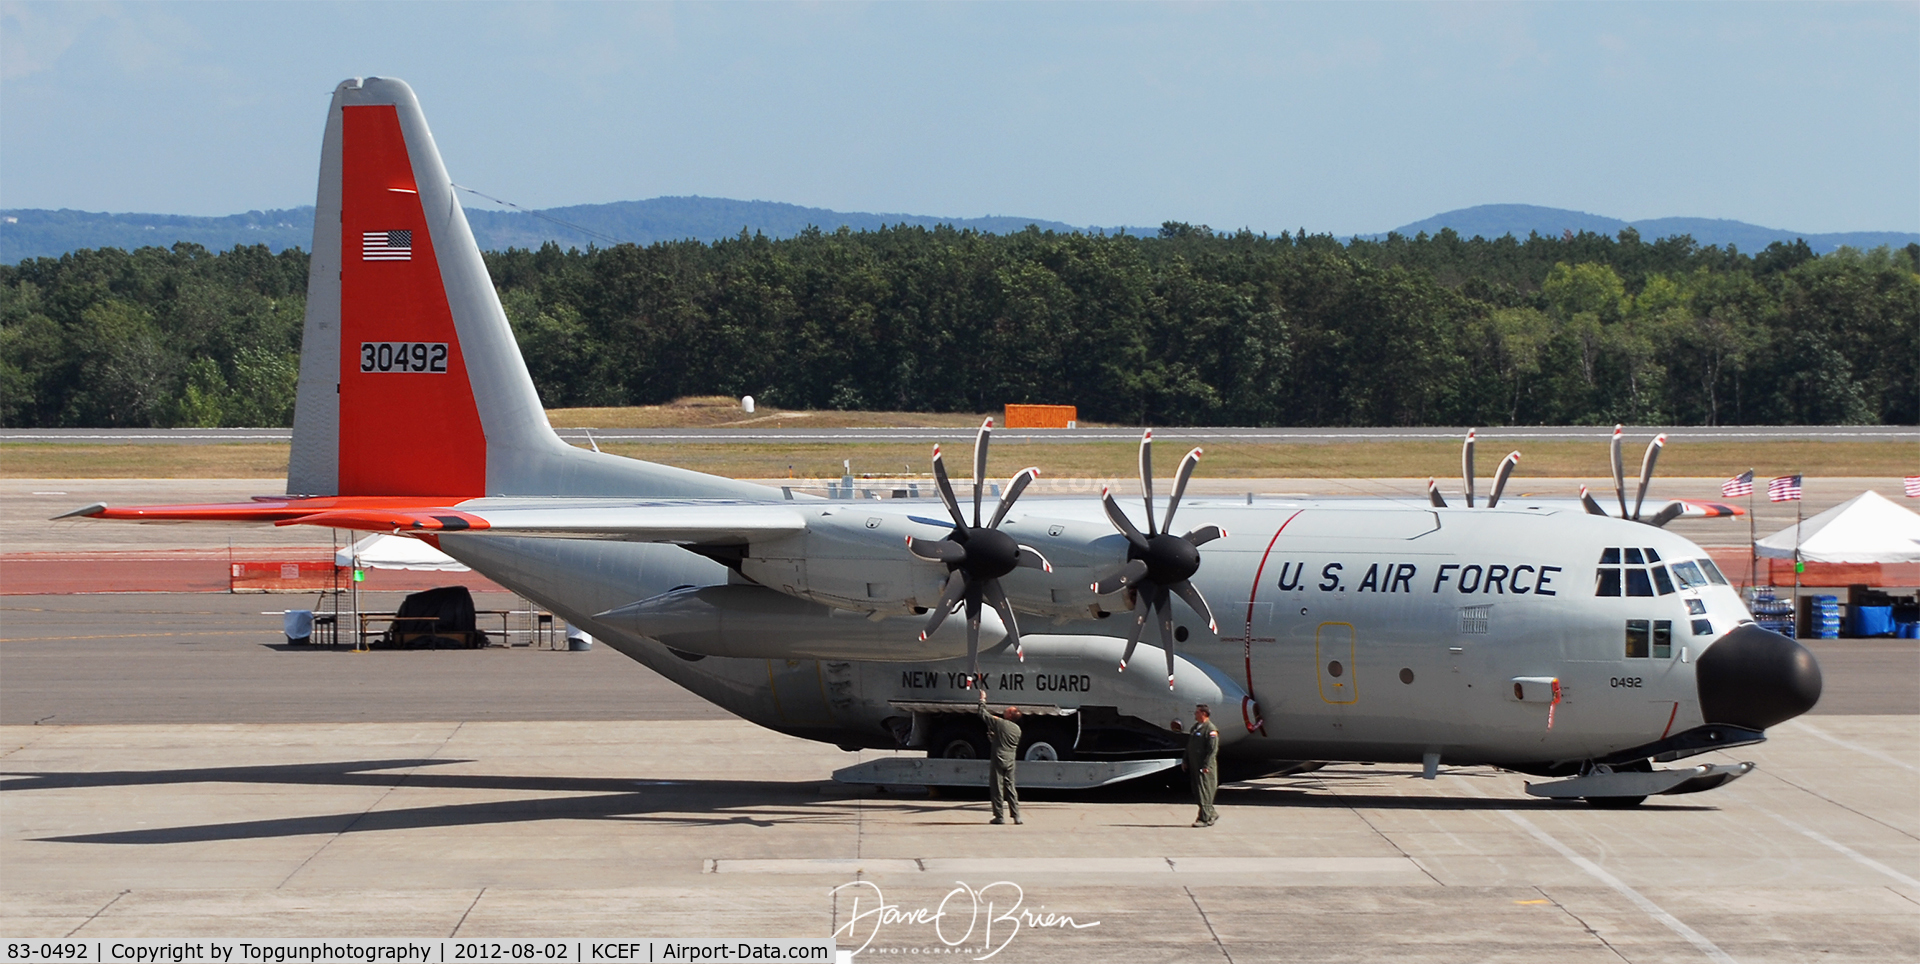 83-0492, 1983 Lockheed LC-130H Hercules C/N 382-5013, SKIER parked for static